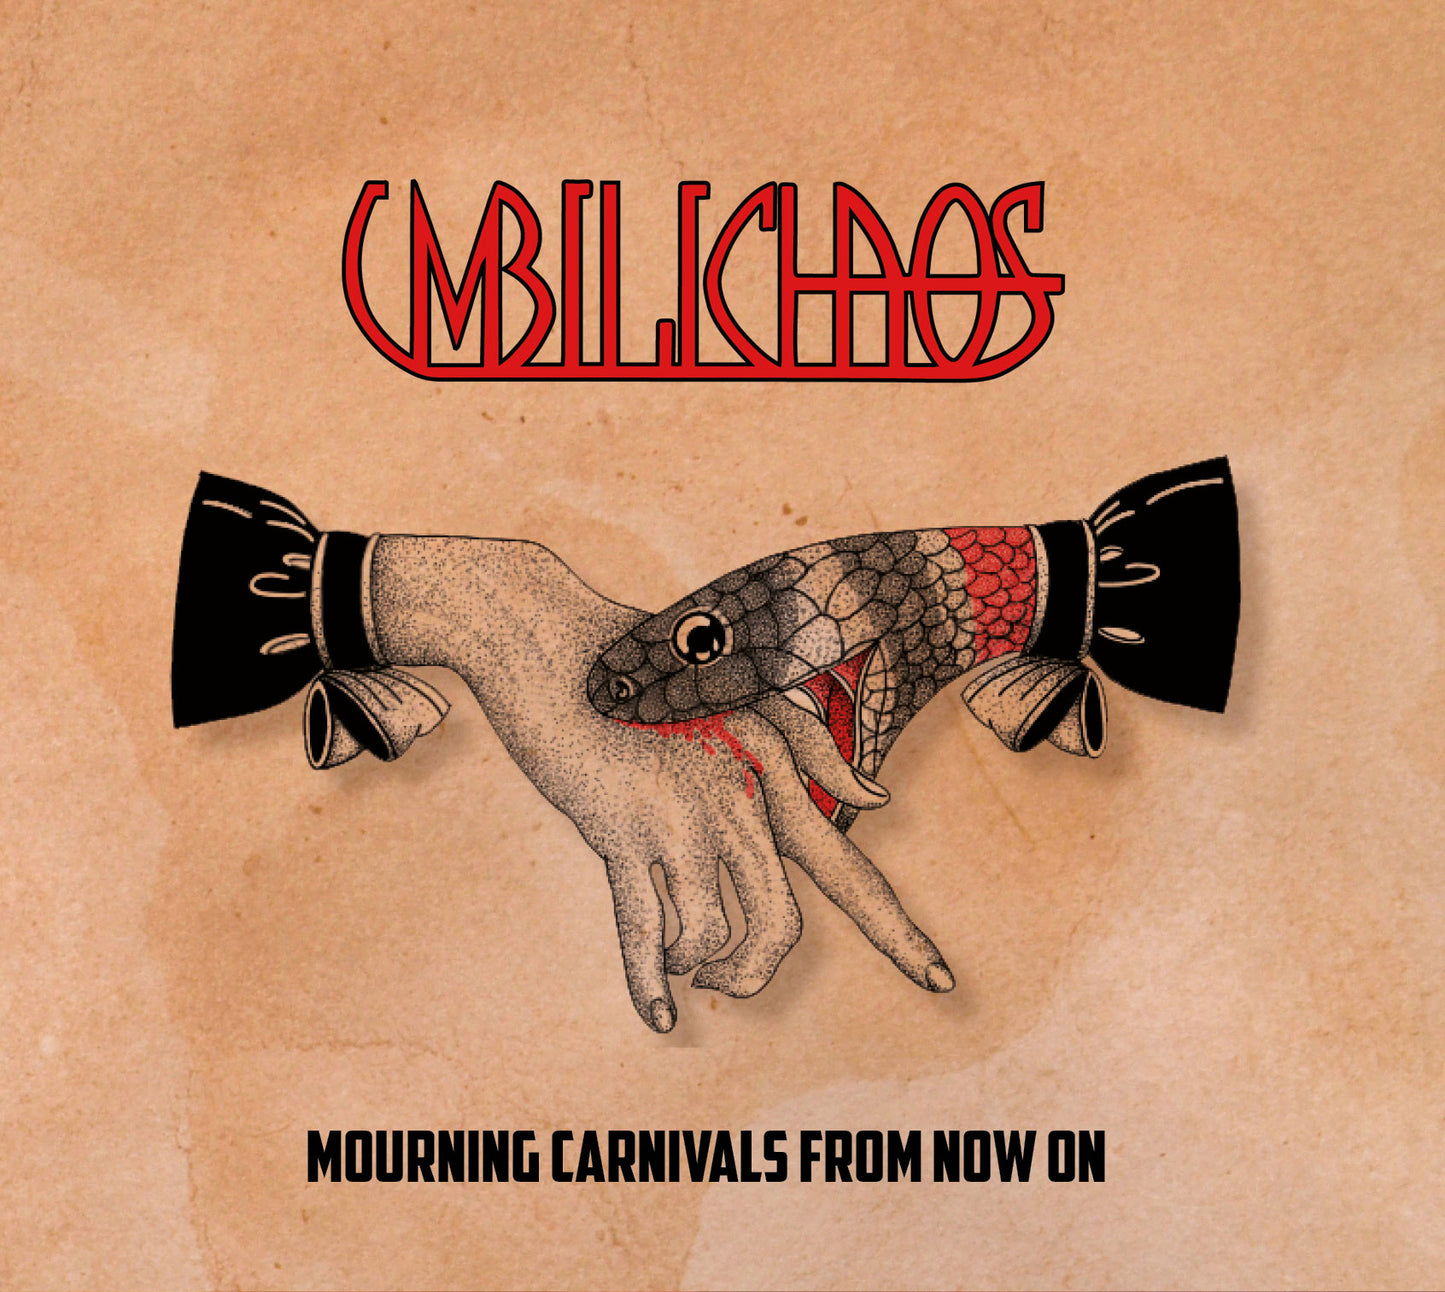 Umbilichaos "Mourning Carnivals From Now On" clear mc